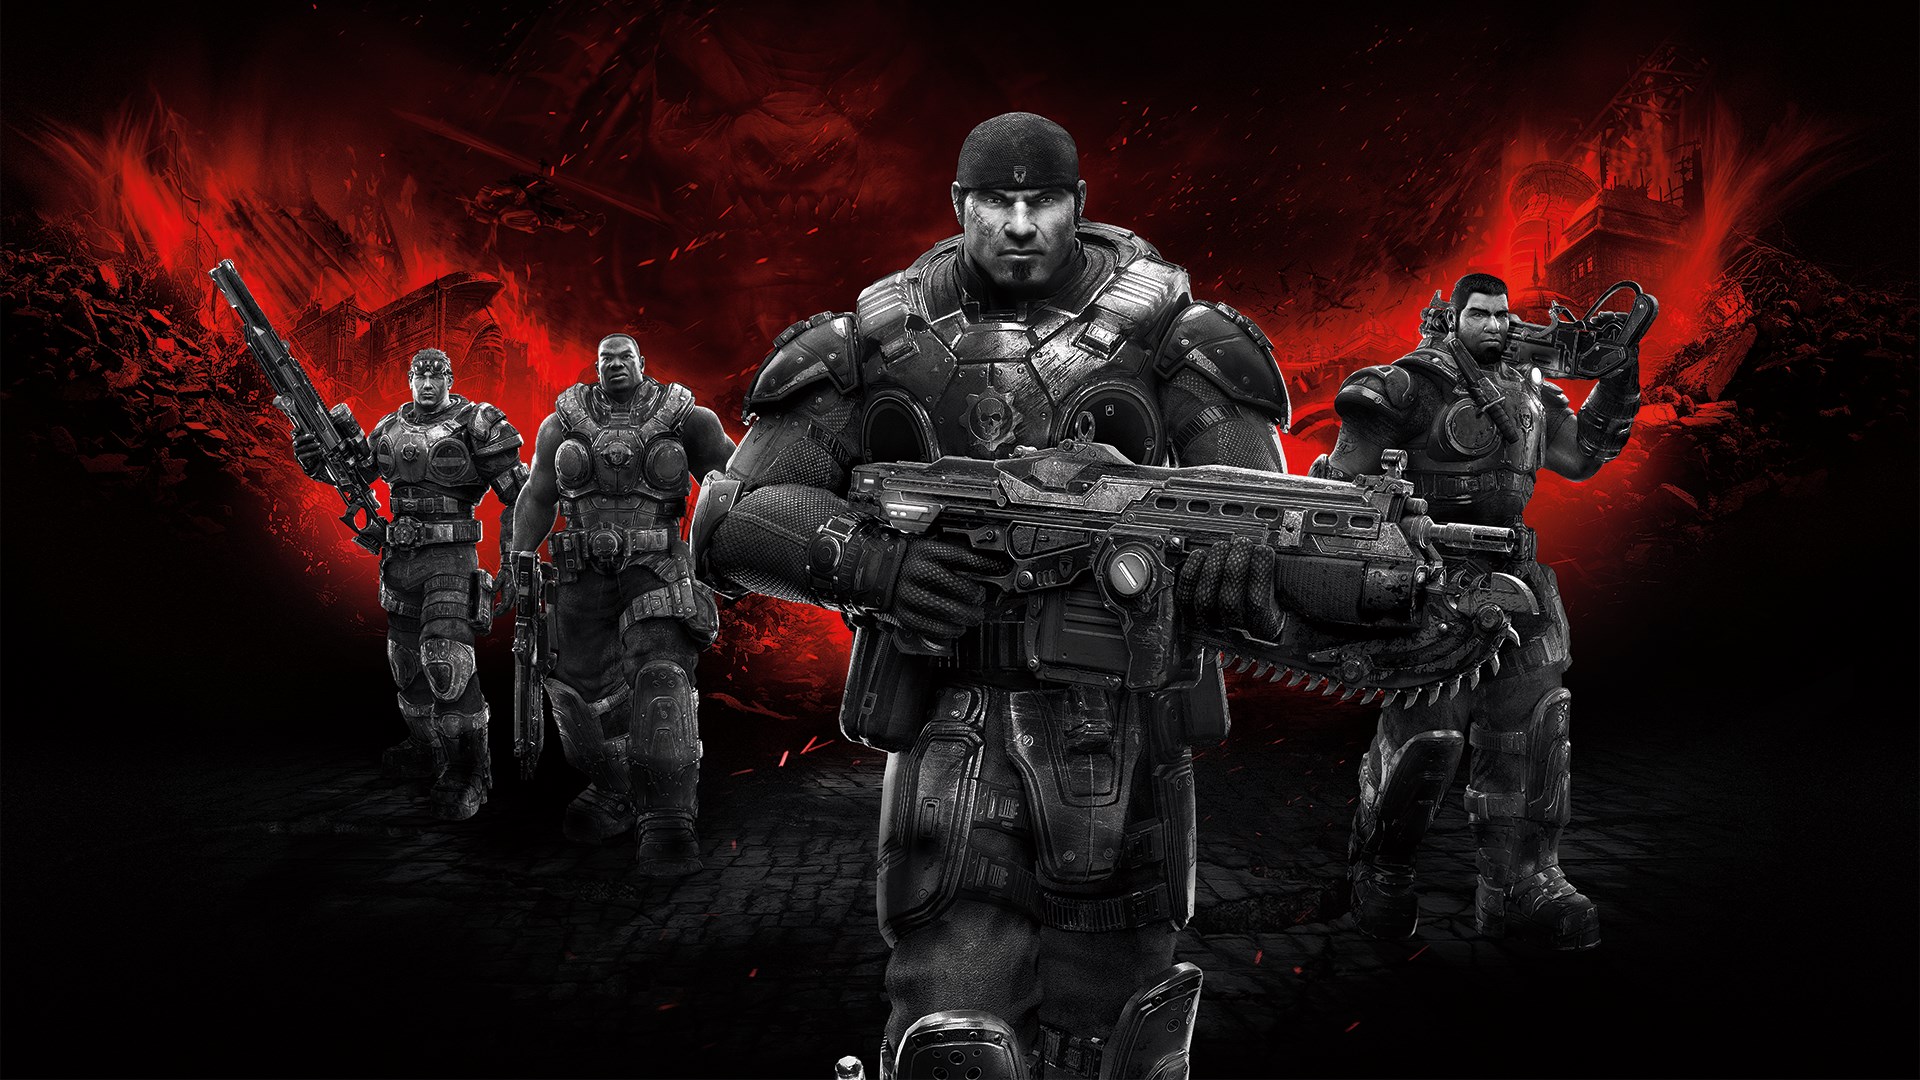 Gears of War 2 • Xbox 360 – Mikes Game Shop